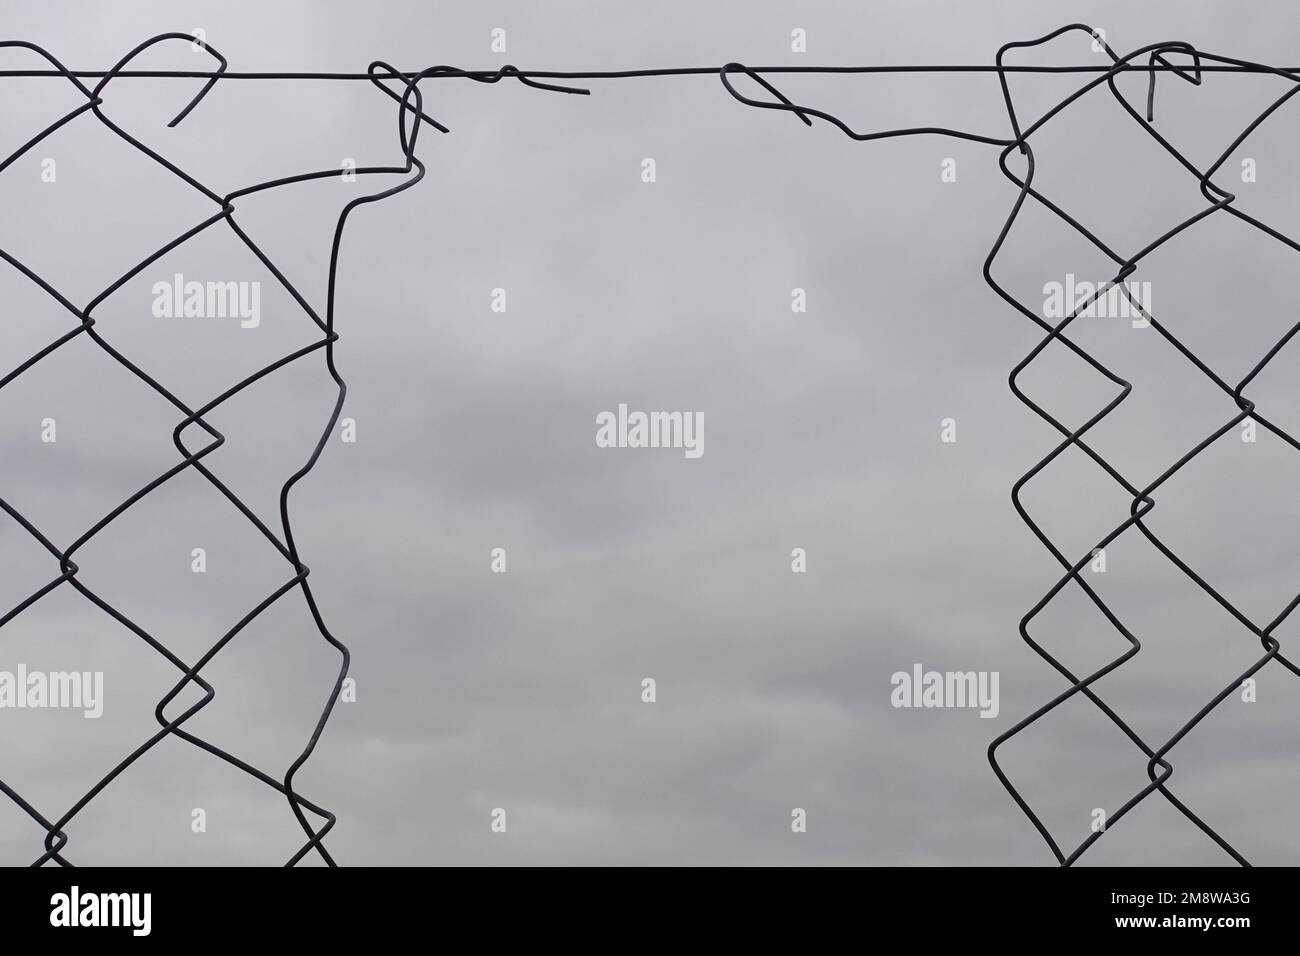 Chain link fence hole damage wire shapes and cloudy sky background. Stock Photo